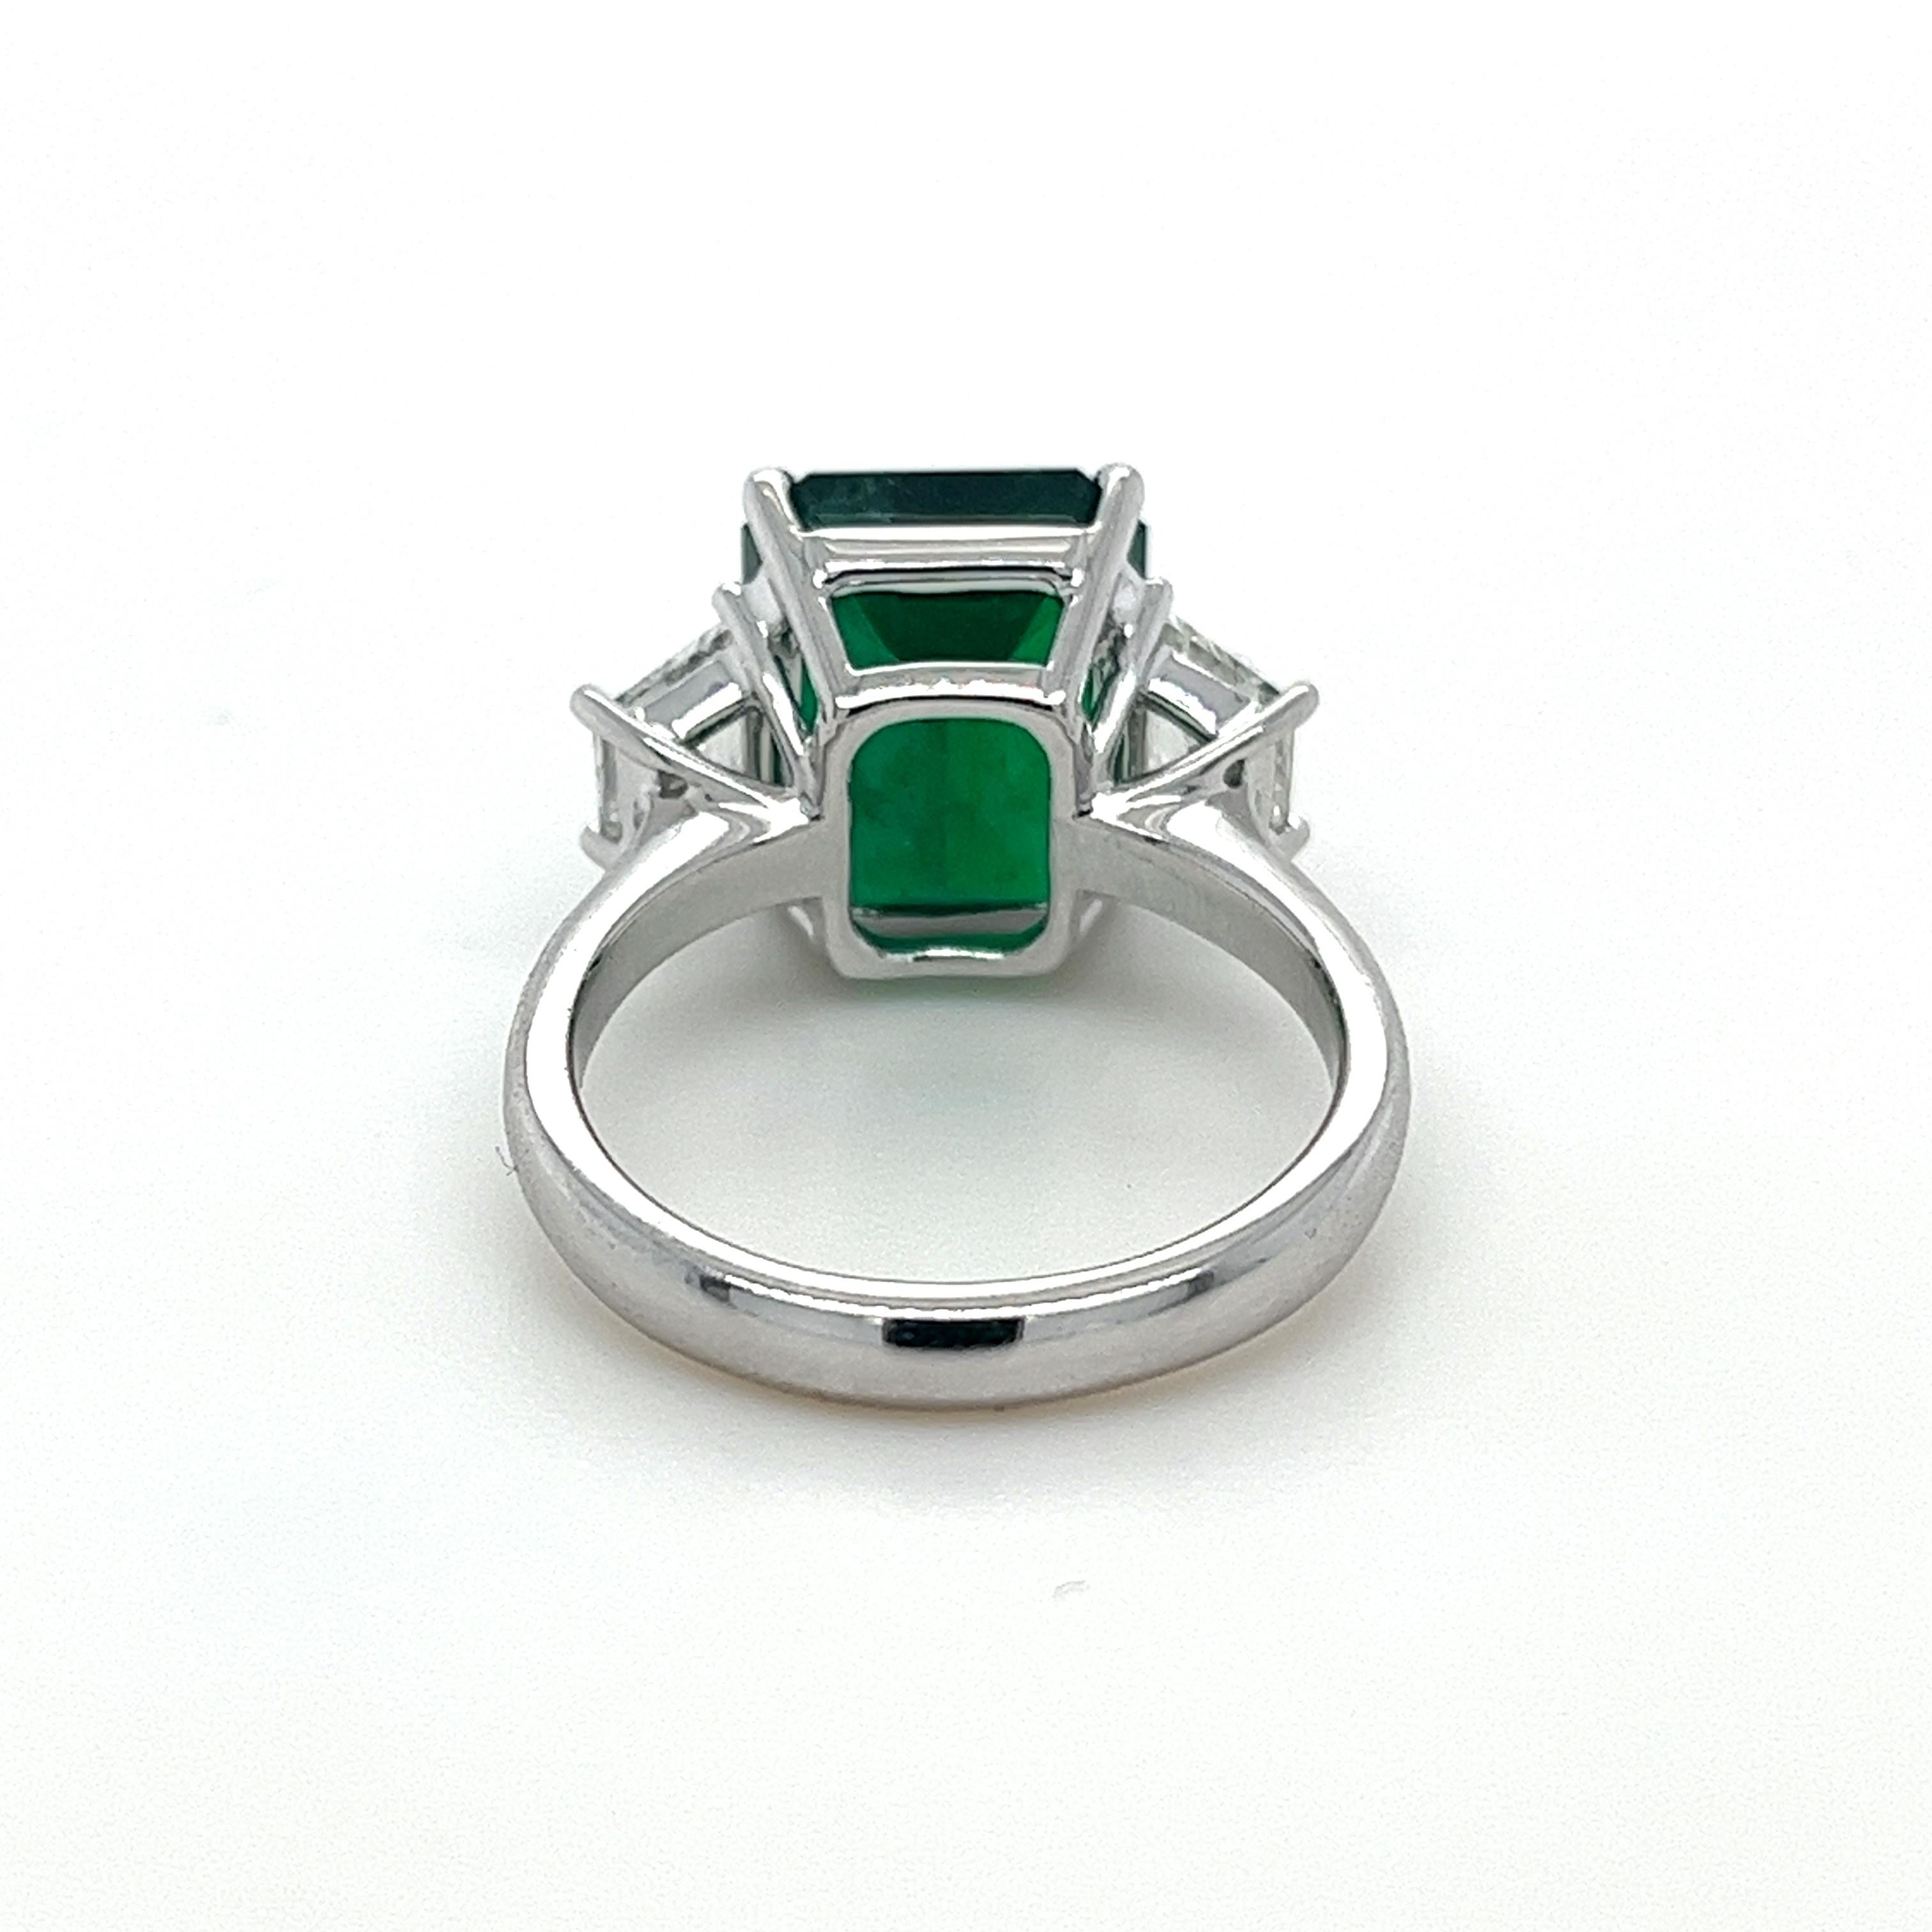 5.03 Carat Emerald Cut Emerald Ring in Platinum In New Condition For Sale In Great Neck, NY